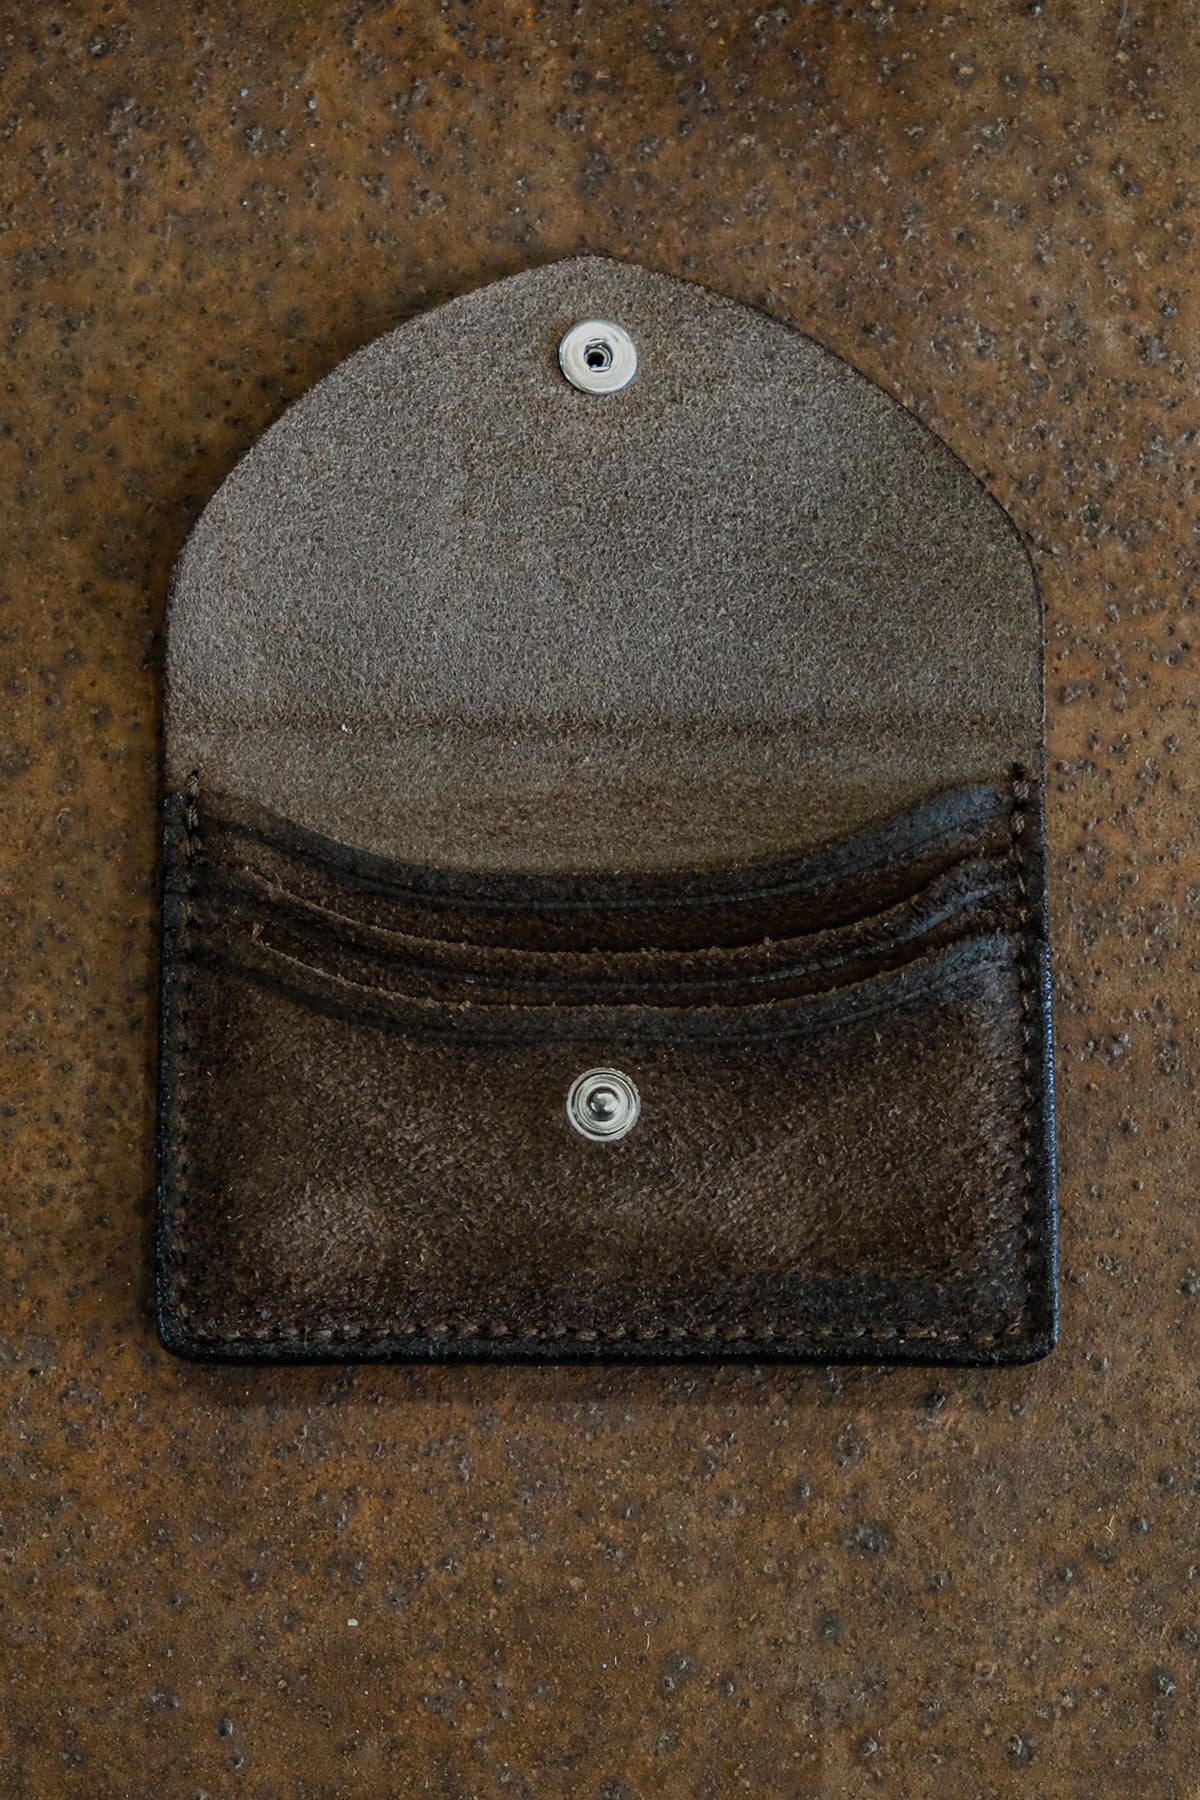 Alberto Luti - Card and Coins Holder in Suede Dark Brown Leather